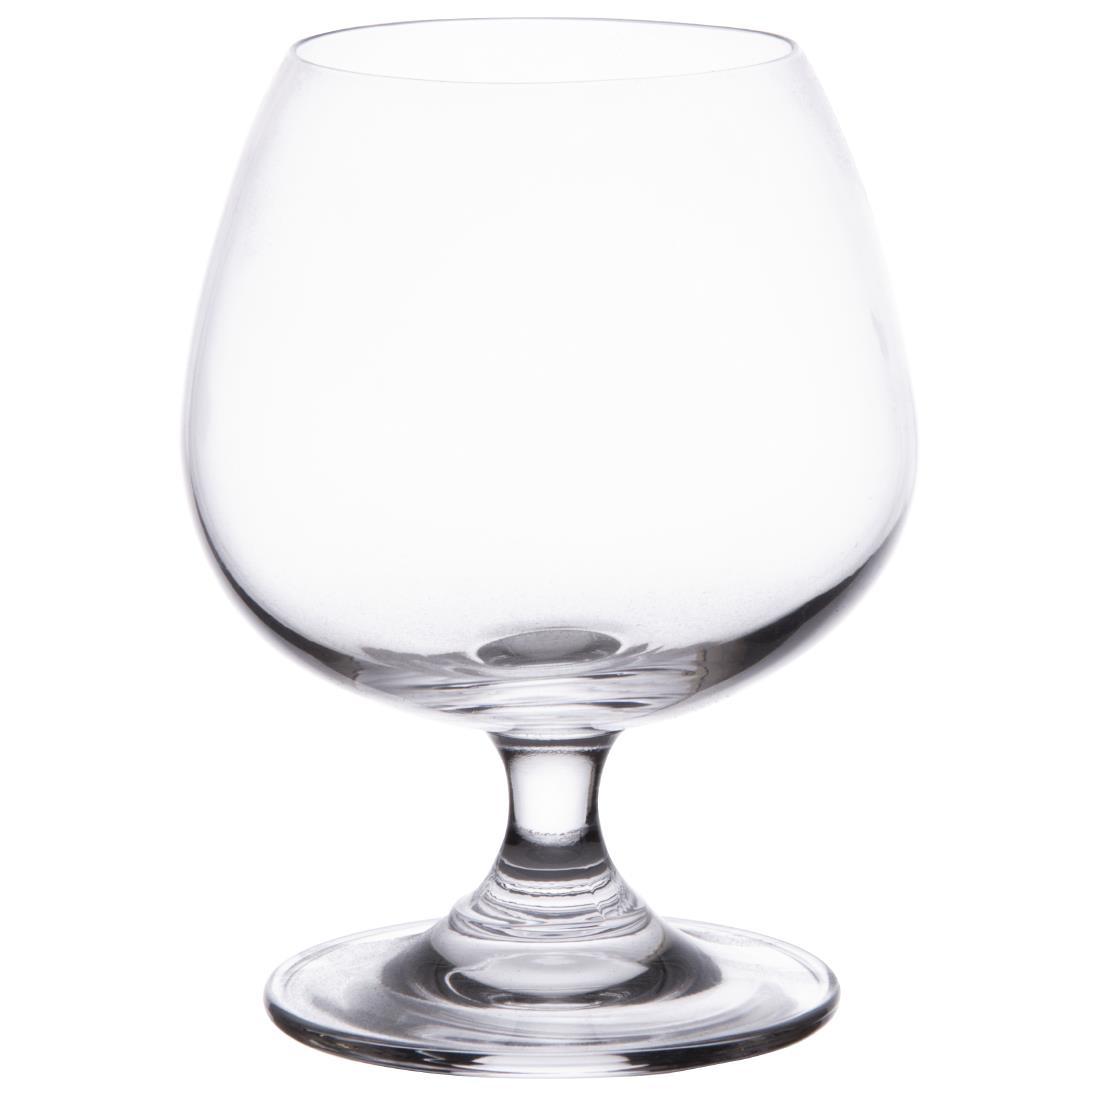 GF739 - G019.1914 - Olympia Bar Collection Crystal Brandy Glasses 400ml  (Pack of 6) - GF739